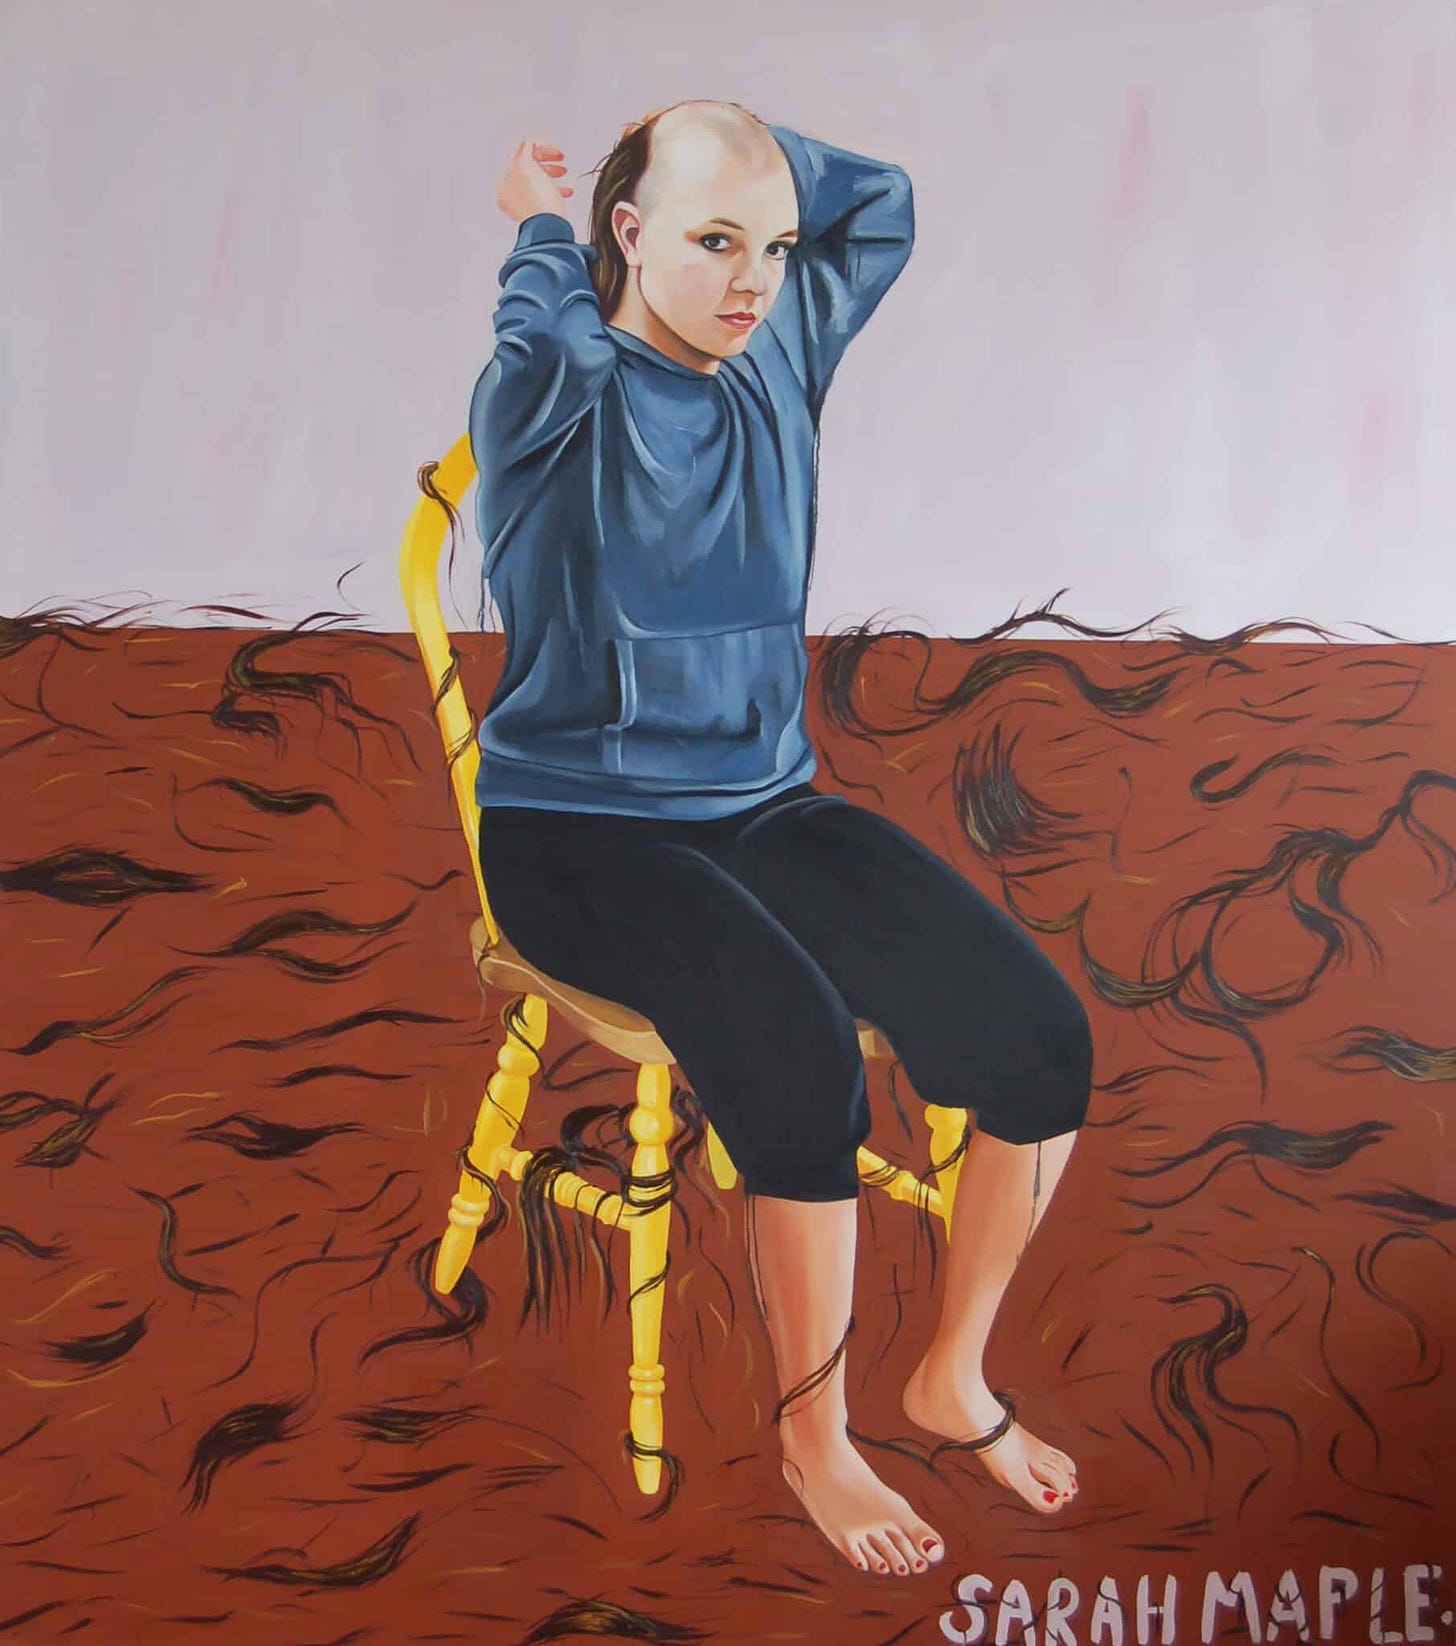 A painting. A white femme that looks strikingly like Britney Spears is seated in a yellow chair, looking at us. Their hands pull at the back of their head, with hair falling off and covering the brown floor in chunks.